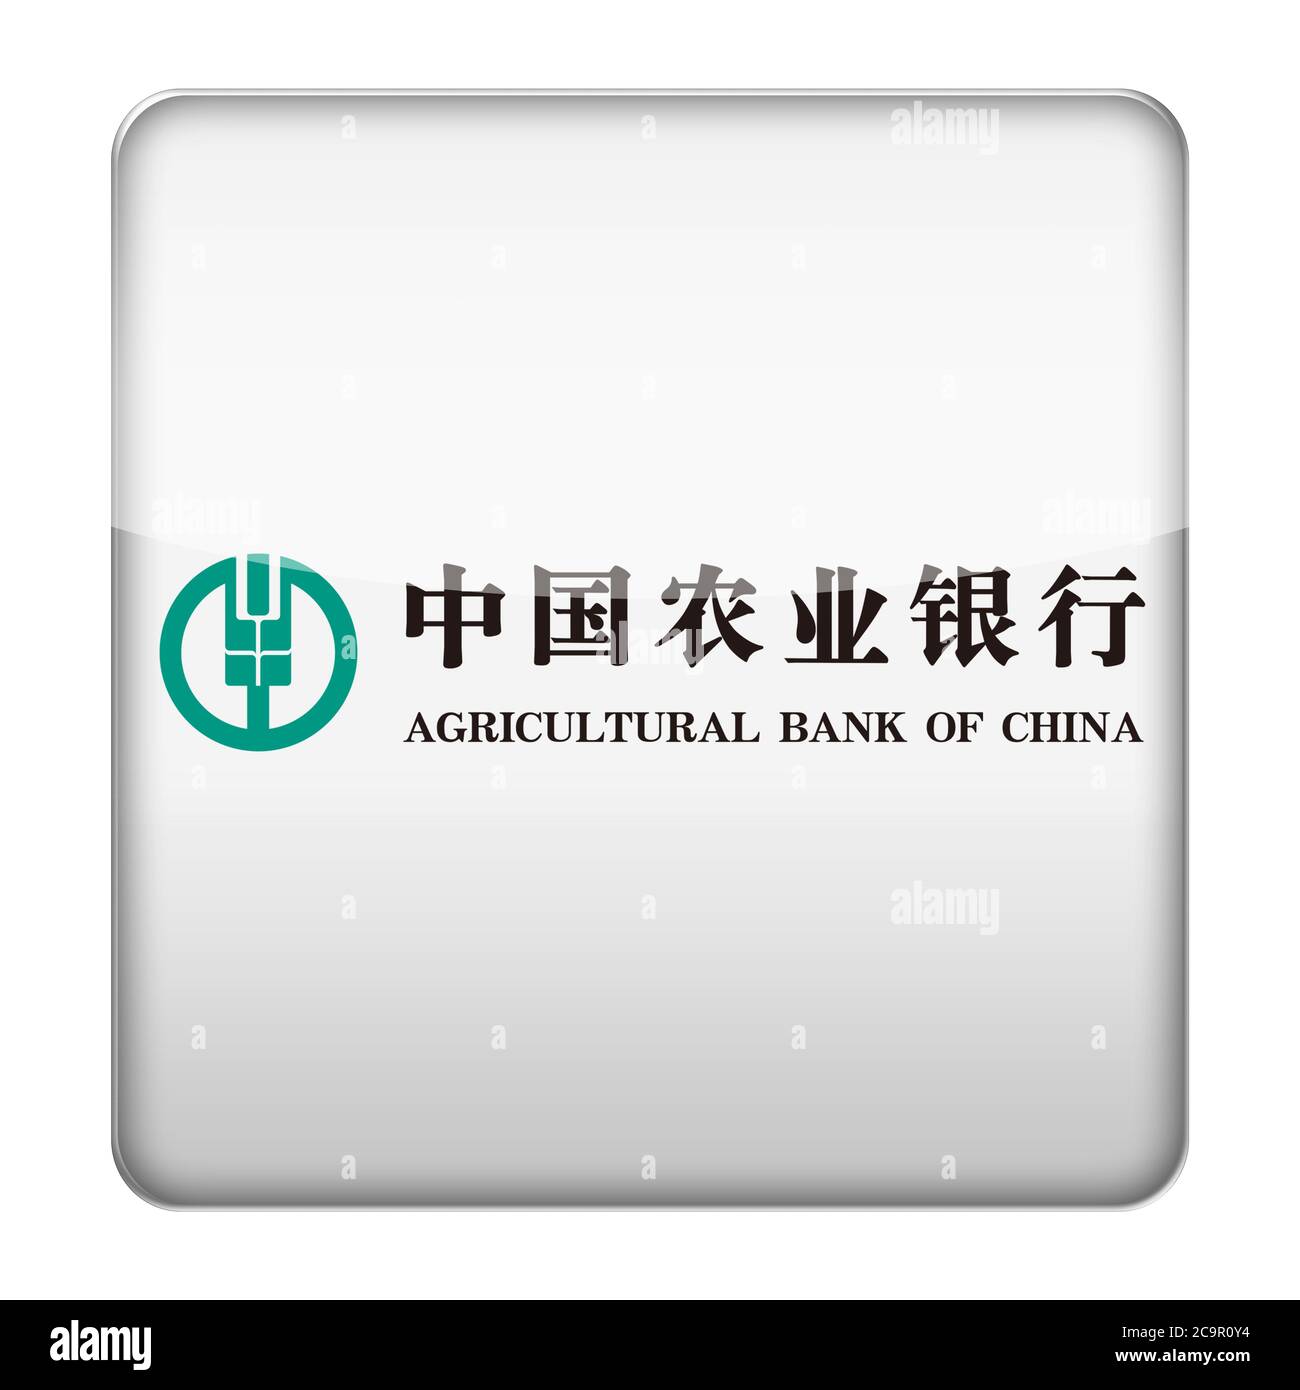 Agricultural Bank of China ABC logo icon button Stock Photo